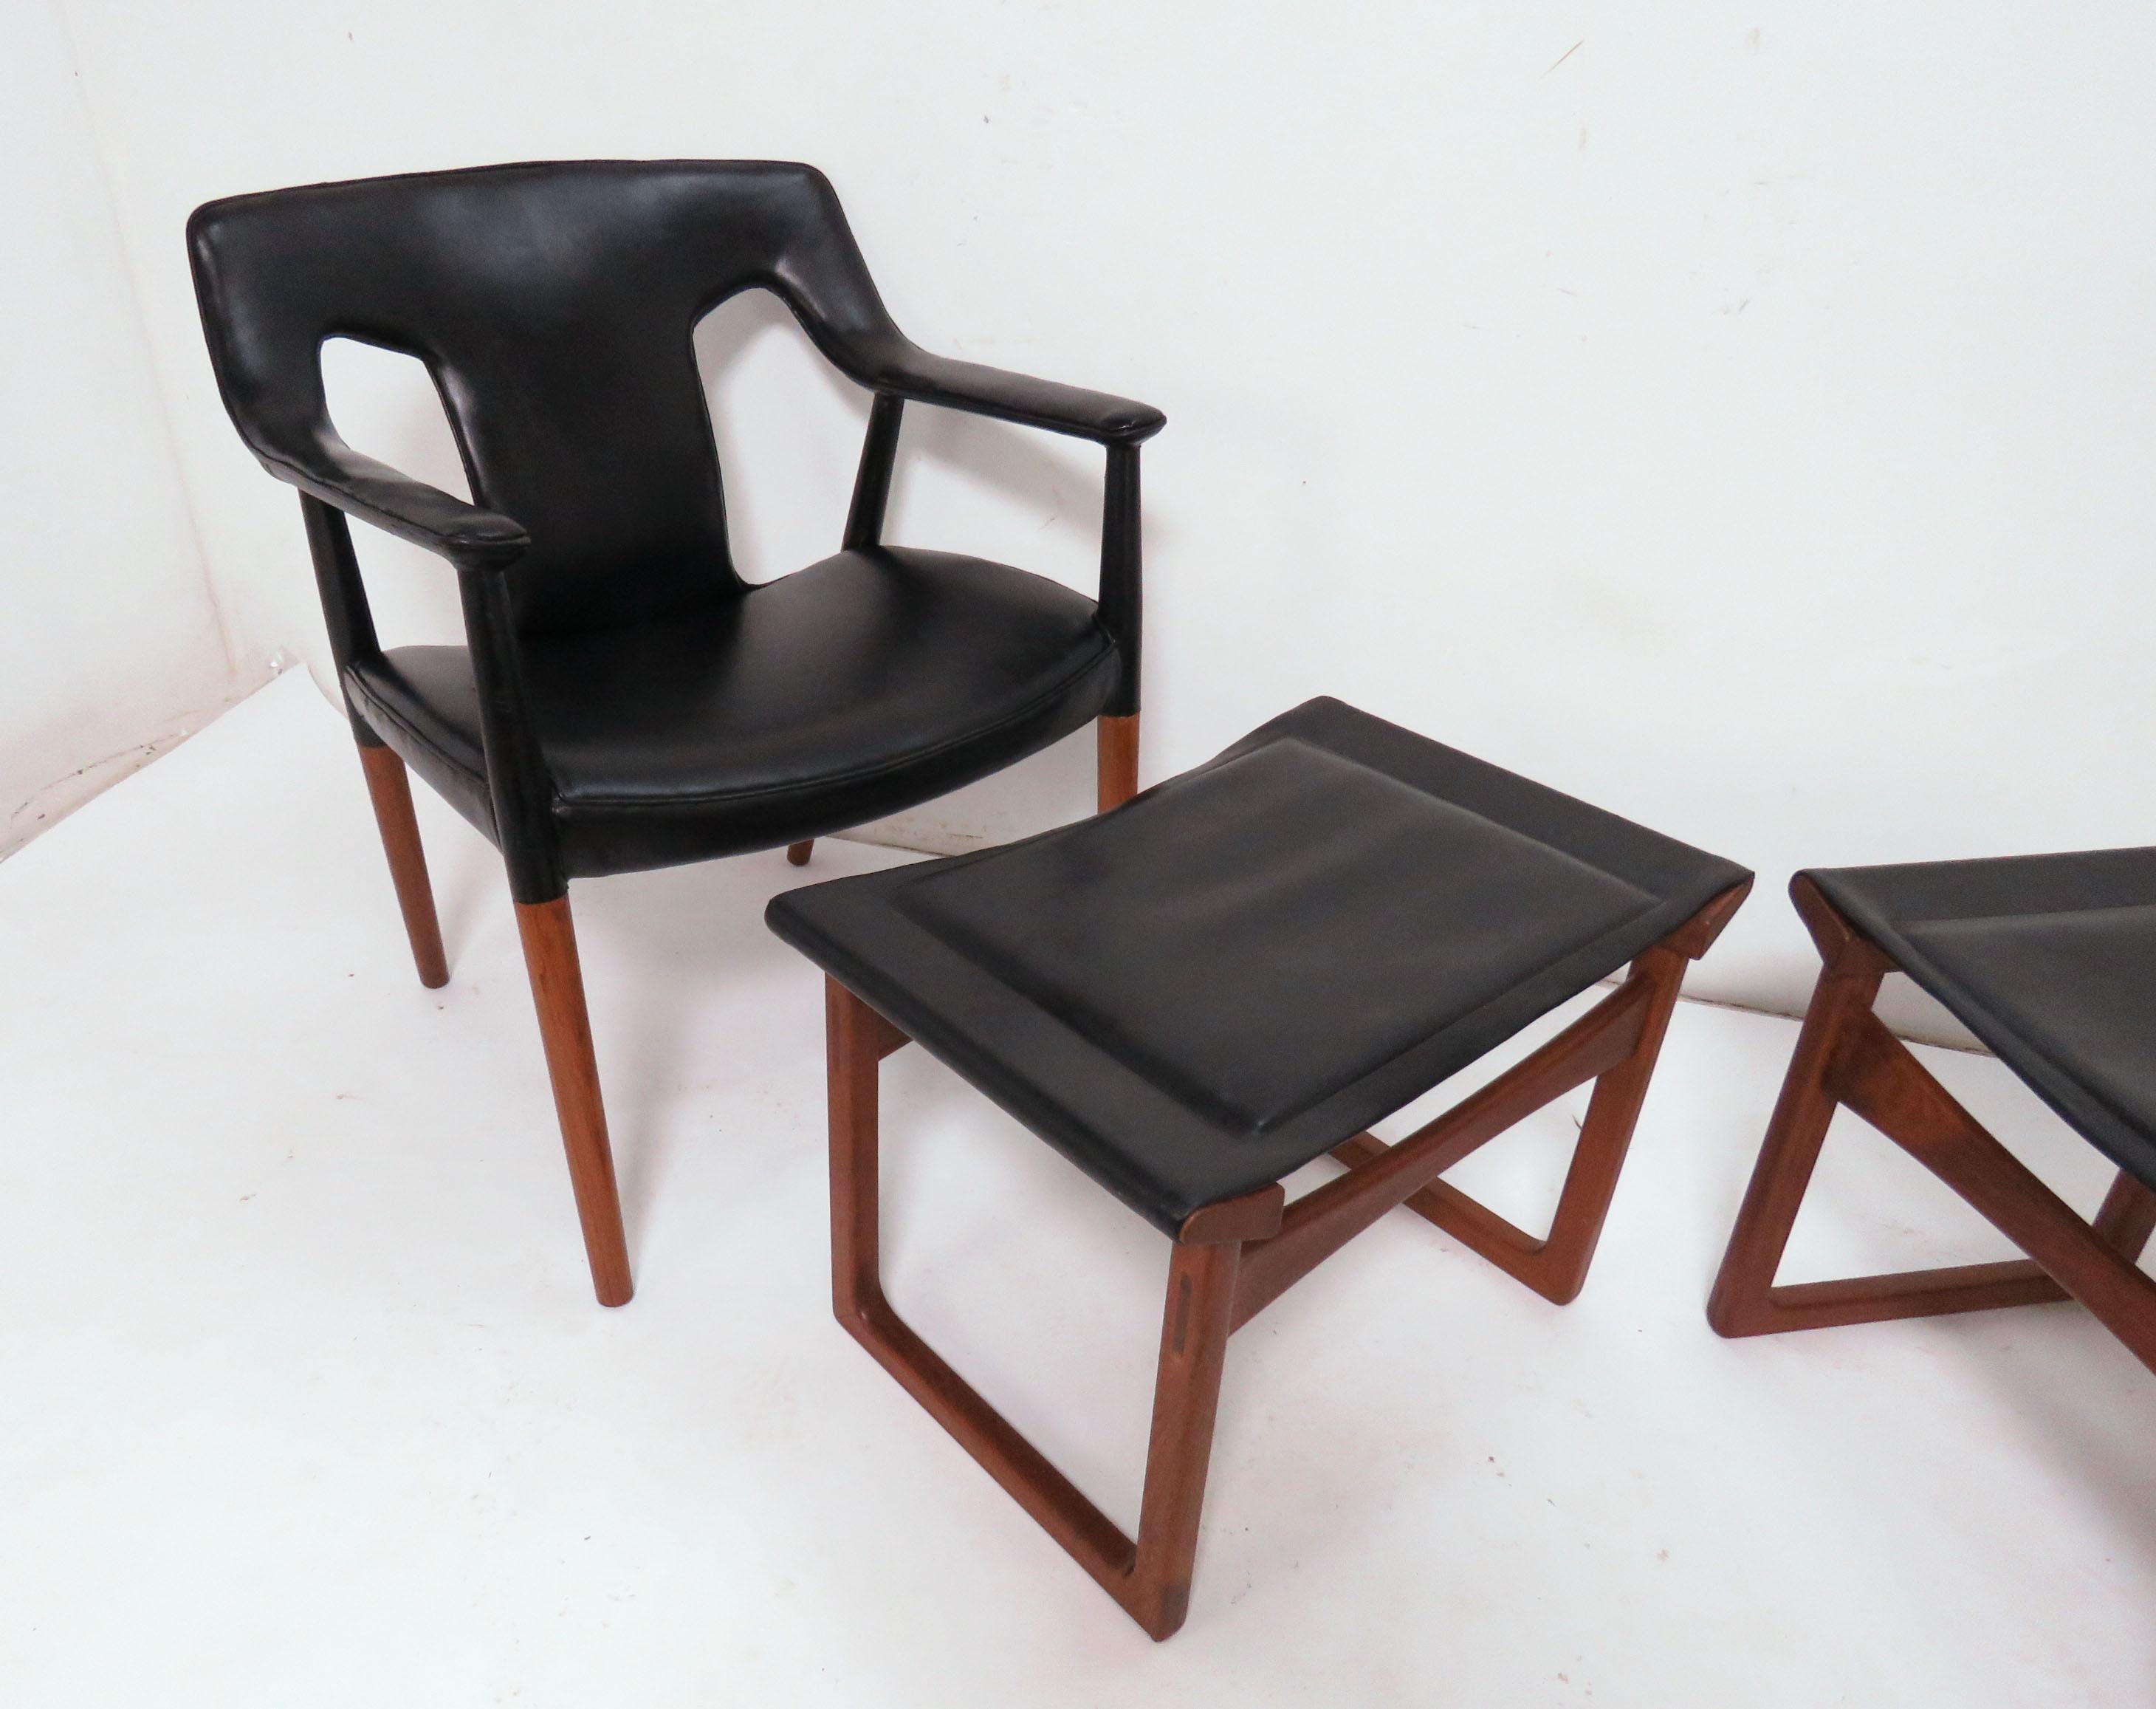 Danish teak lounge armchair and footstool/ottoman, circa mid-1950s. Designed by Ejner Larsen and Aksel Bender Madsen and made by Ludvig Pontoppidan. Note: each chair and ottoman set is priced separately (i.e., two sets available, each set consisting